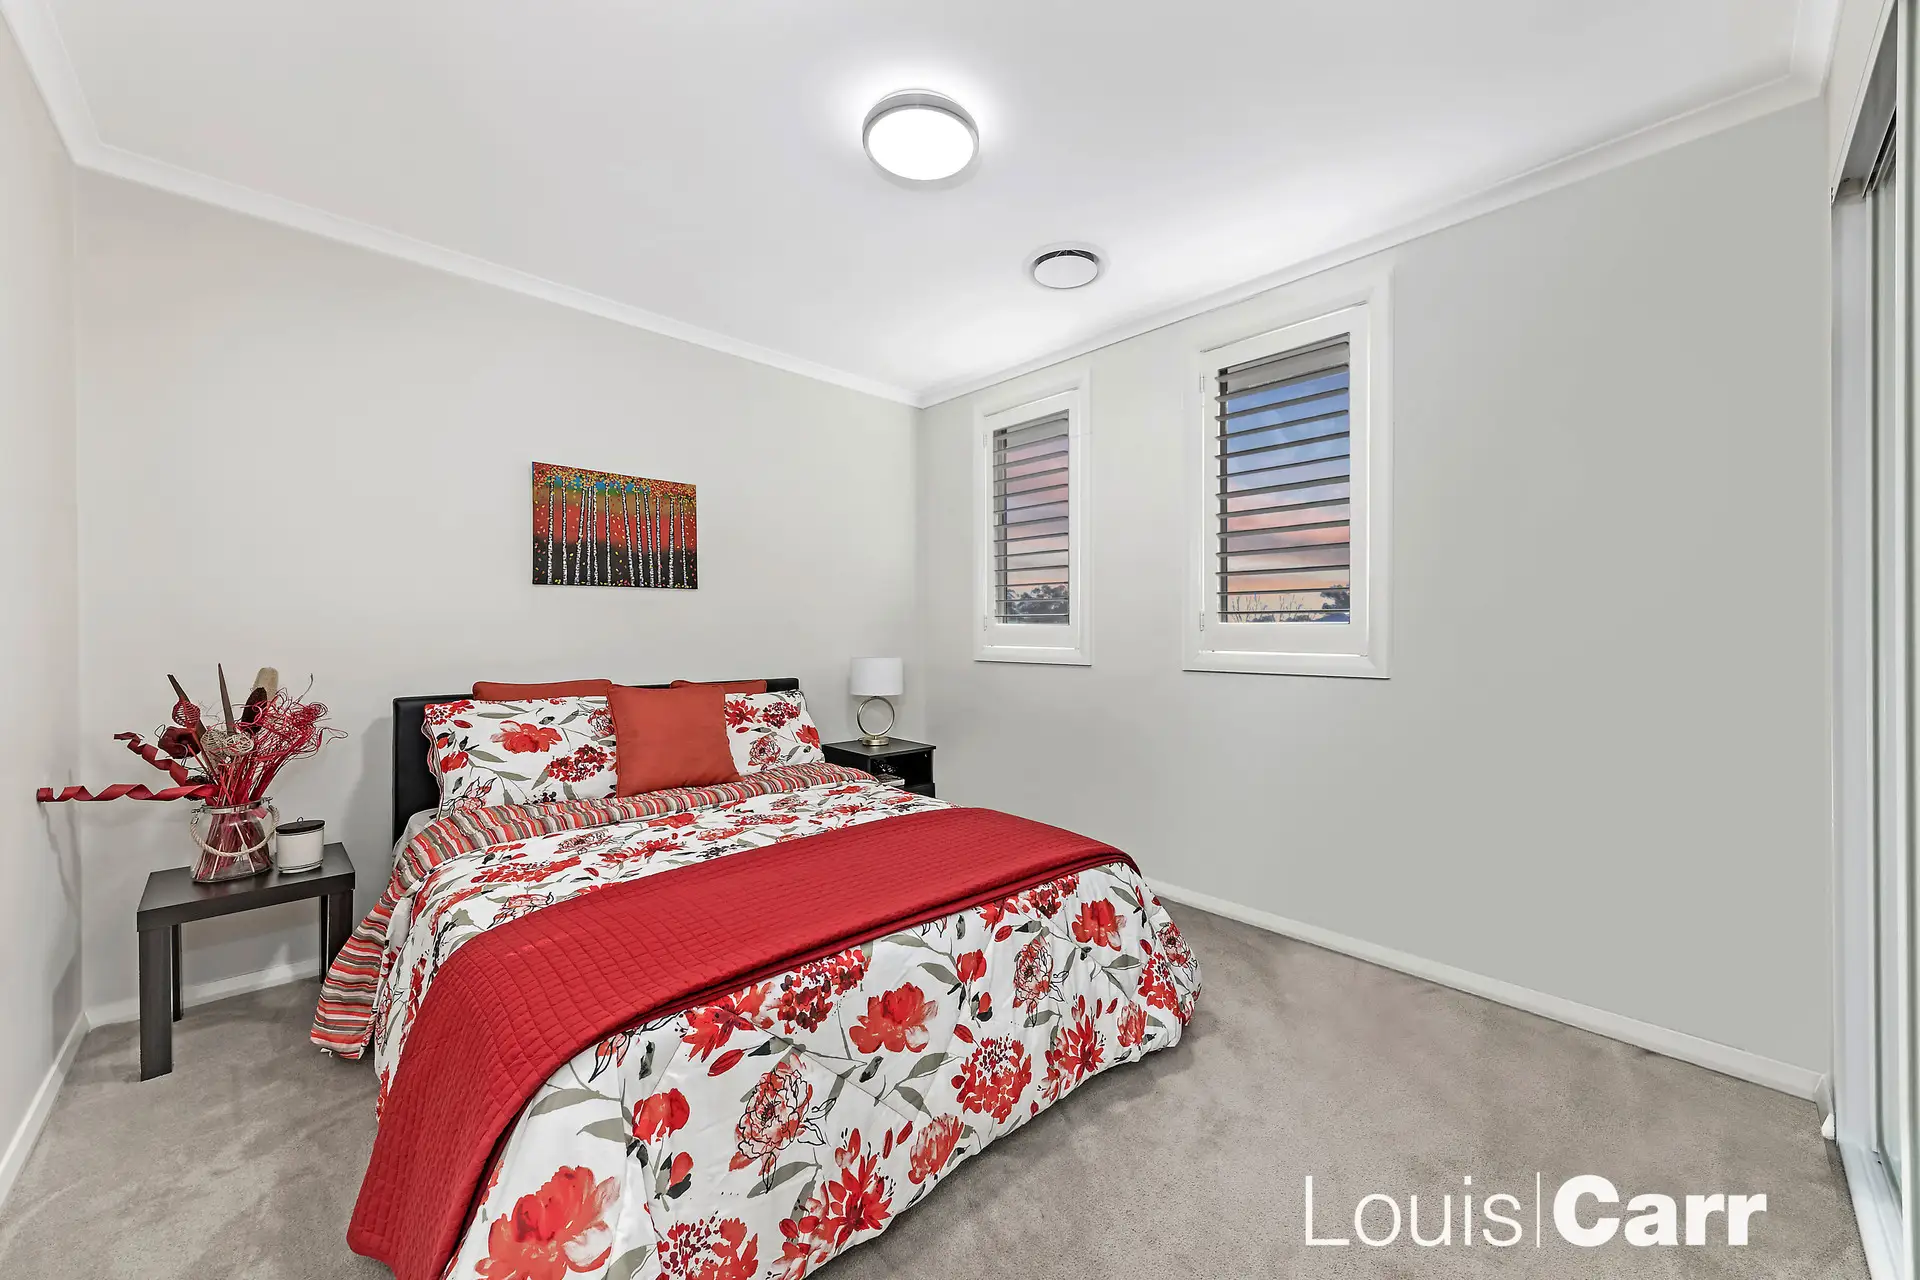 Photo #9: 28 Springbrook Boulevard, North Kellyville - Sold by Louis Carr Real Estate